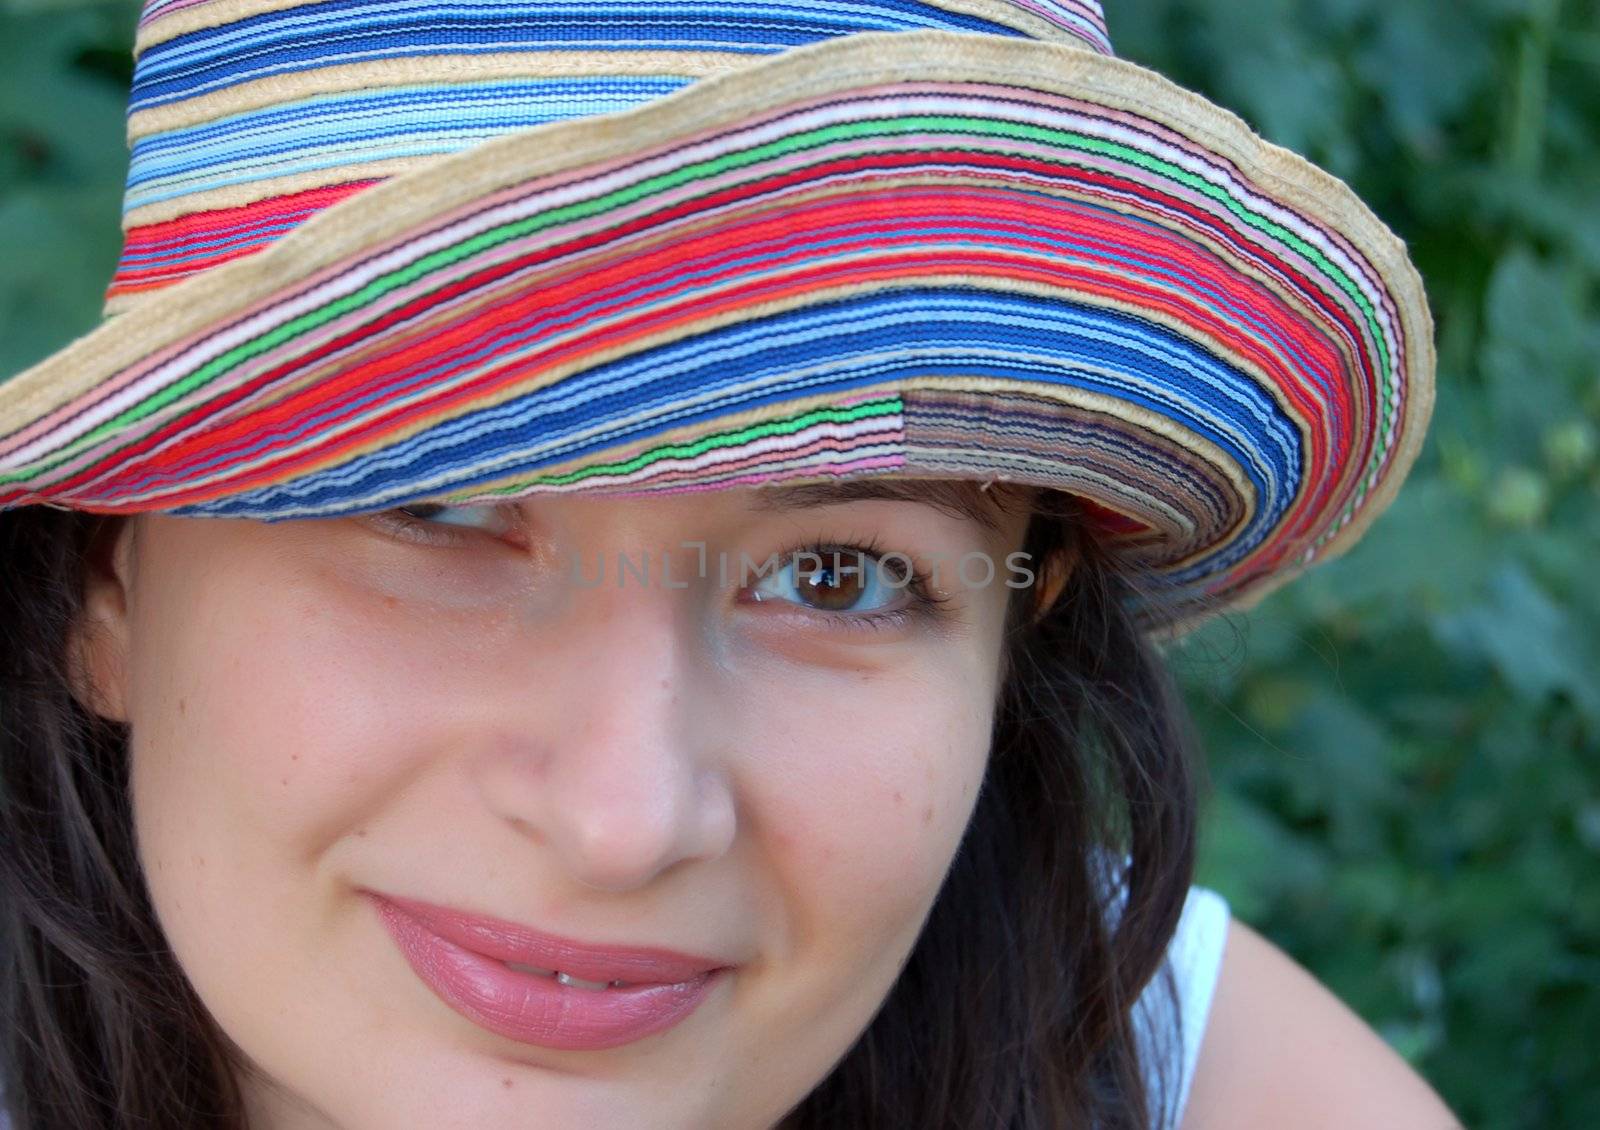 close-up of attractive young brunette in colorful hat against green leaves in the garden